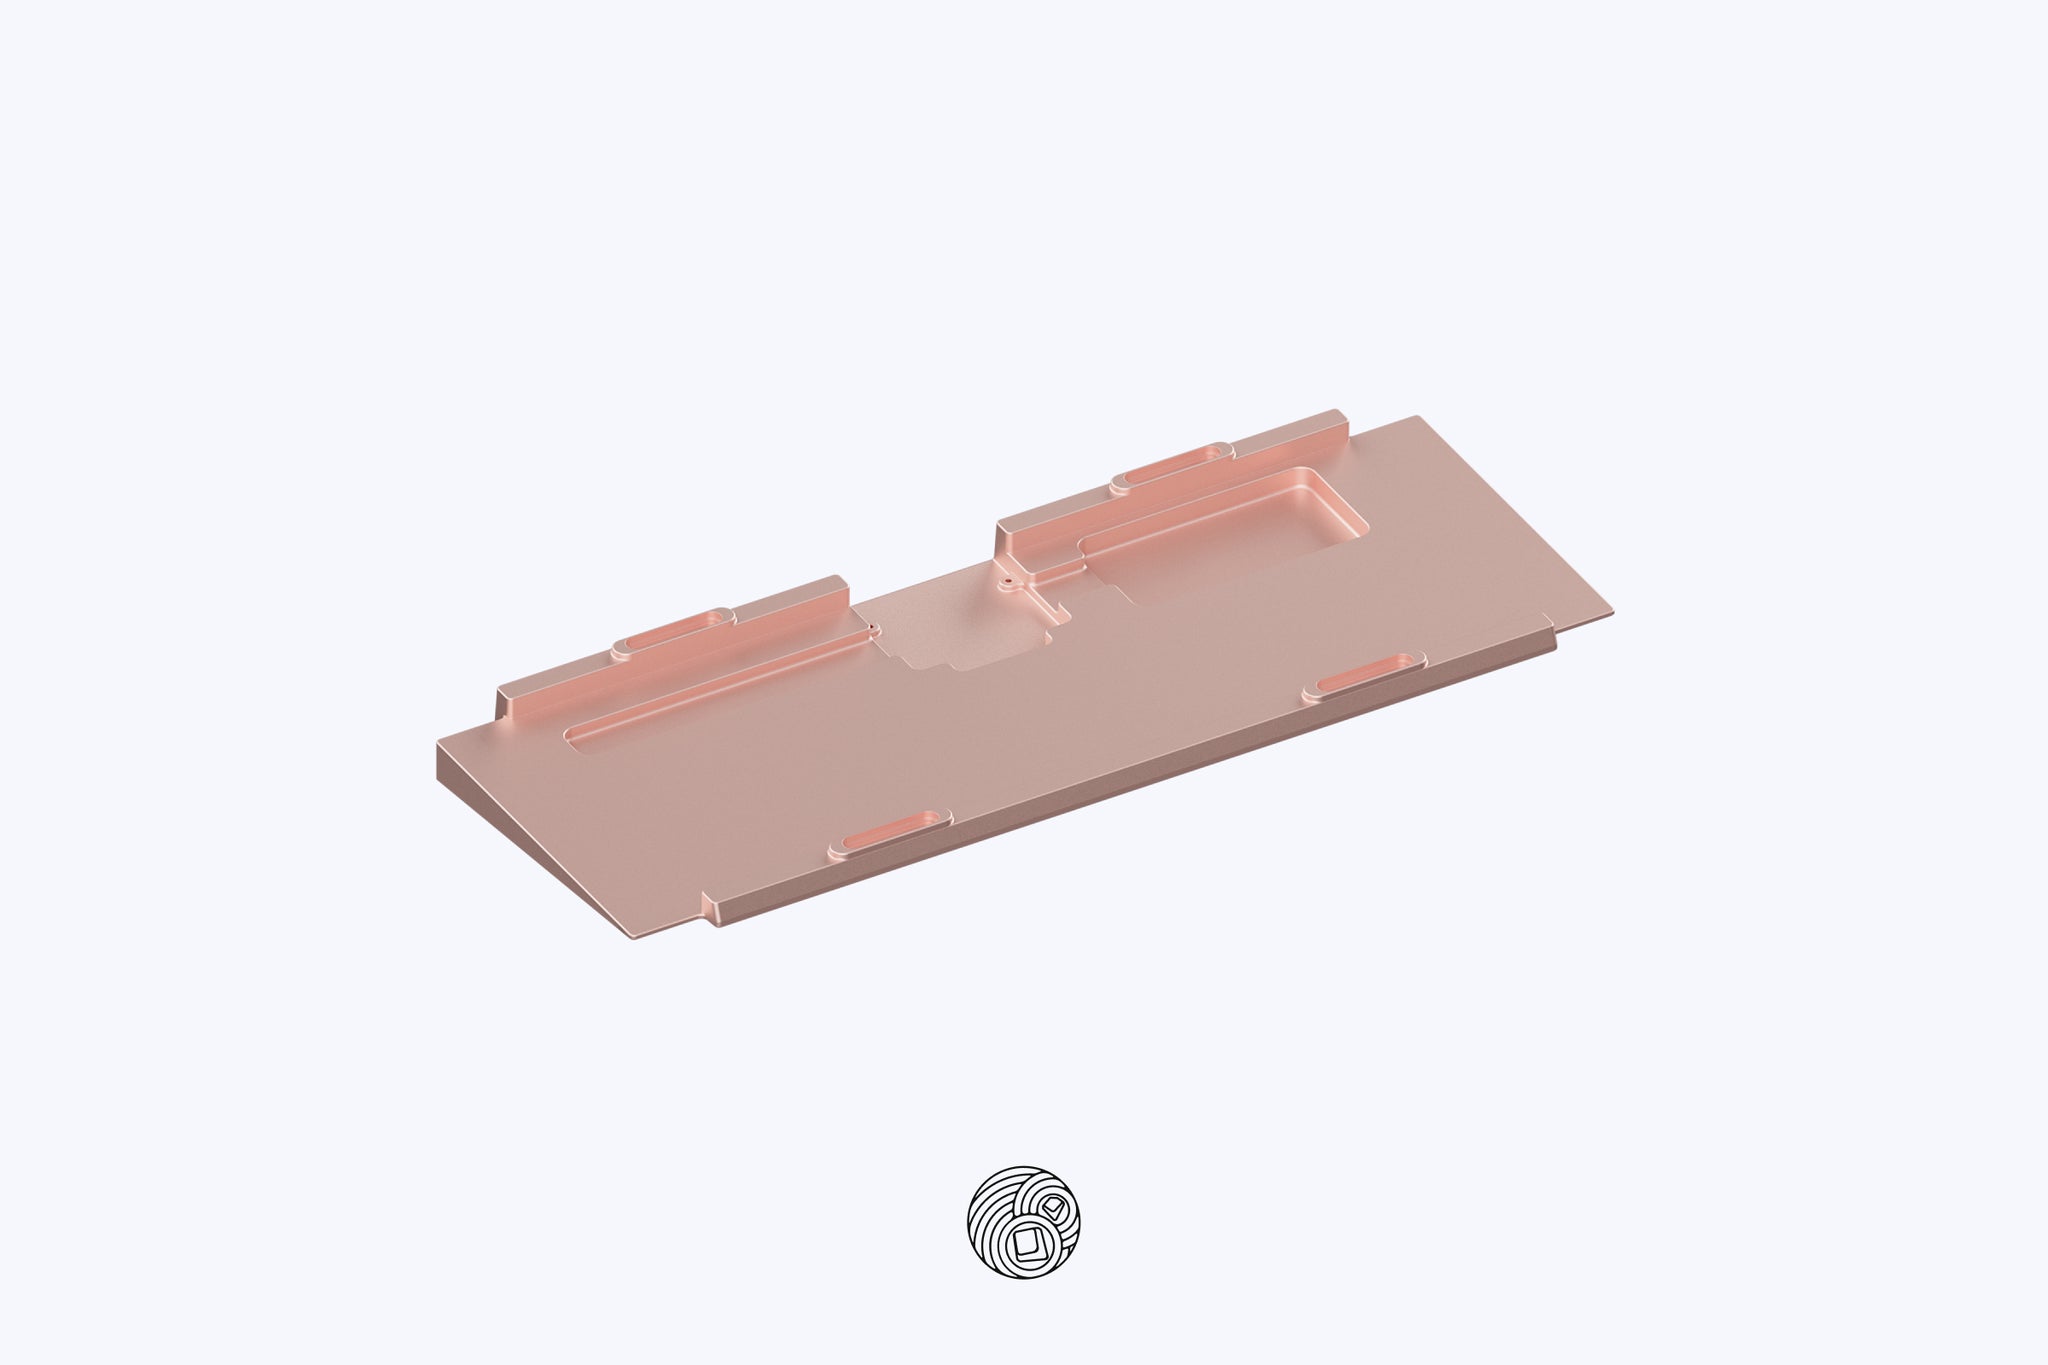 [Group Buy] Monokei Kei v2 Add-ons Parts for 60%